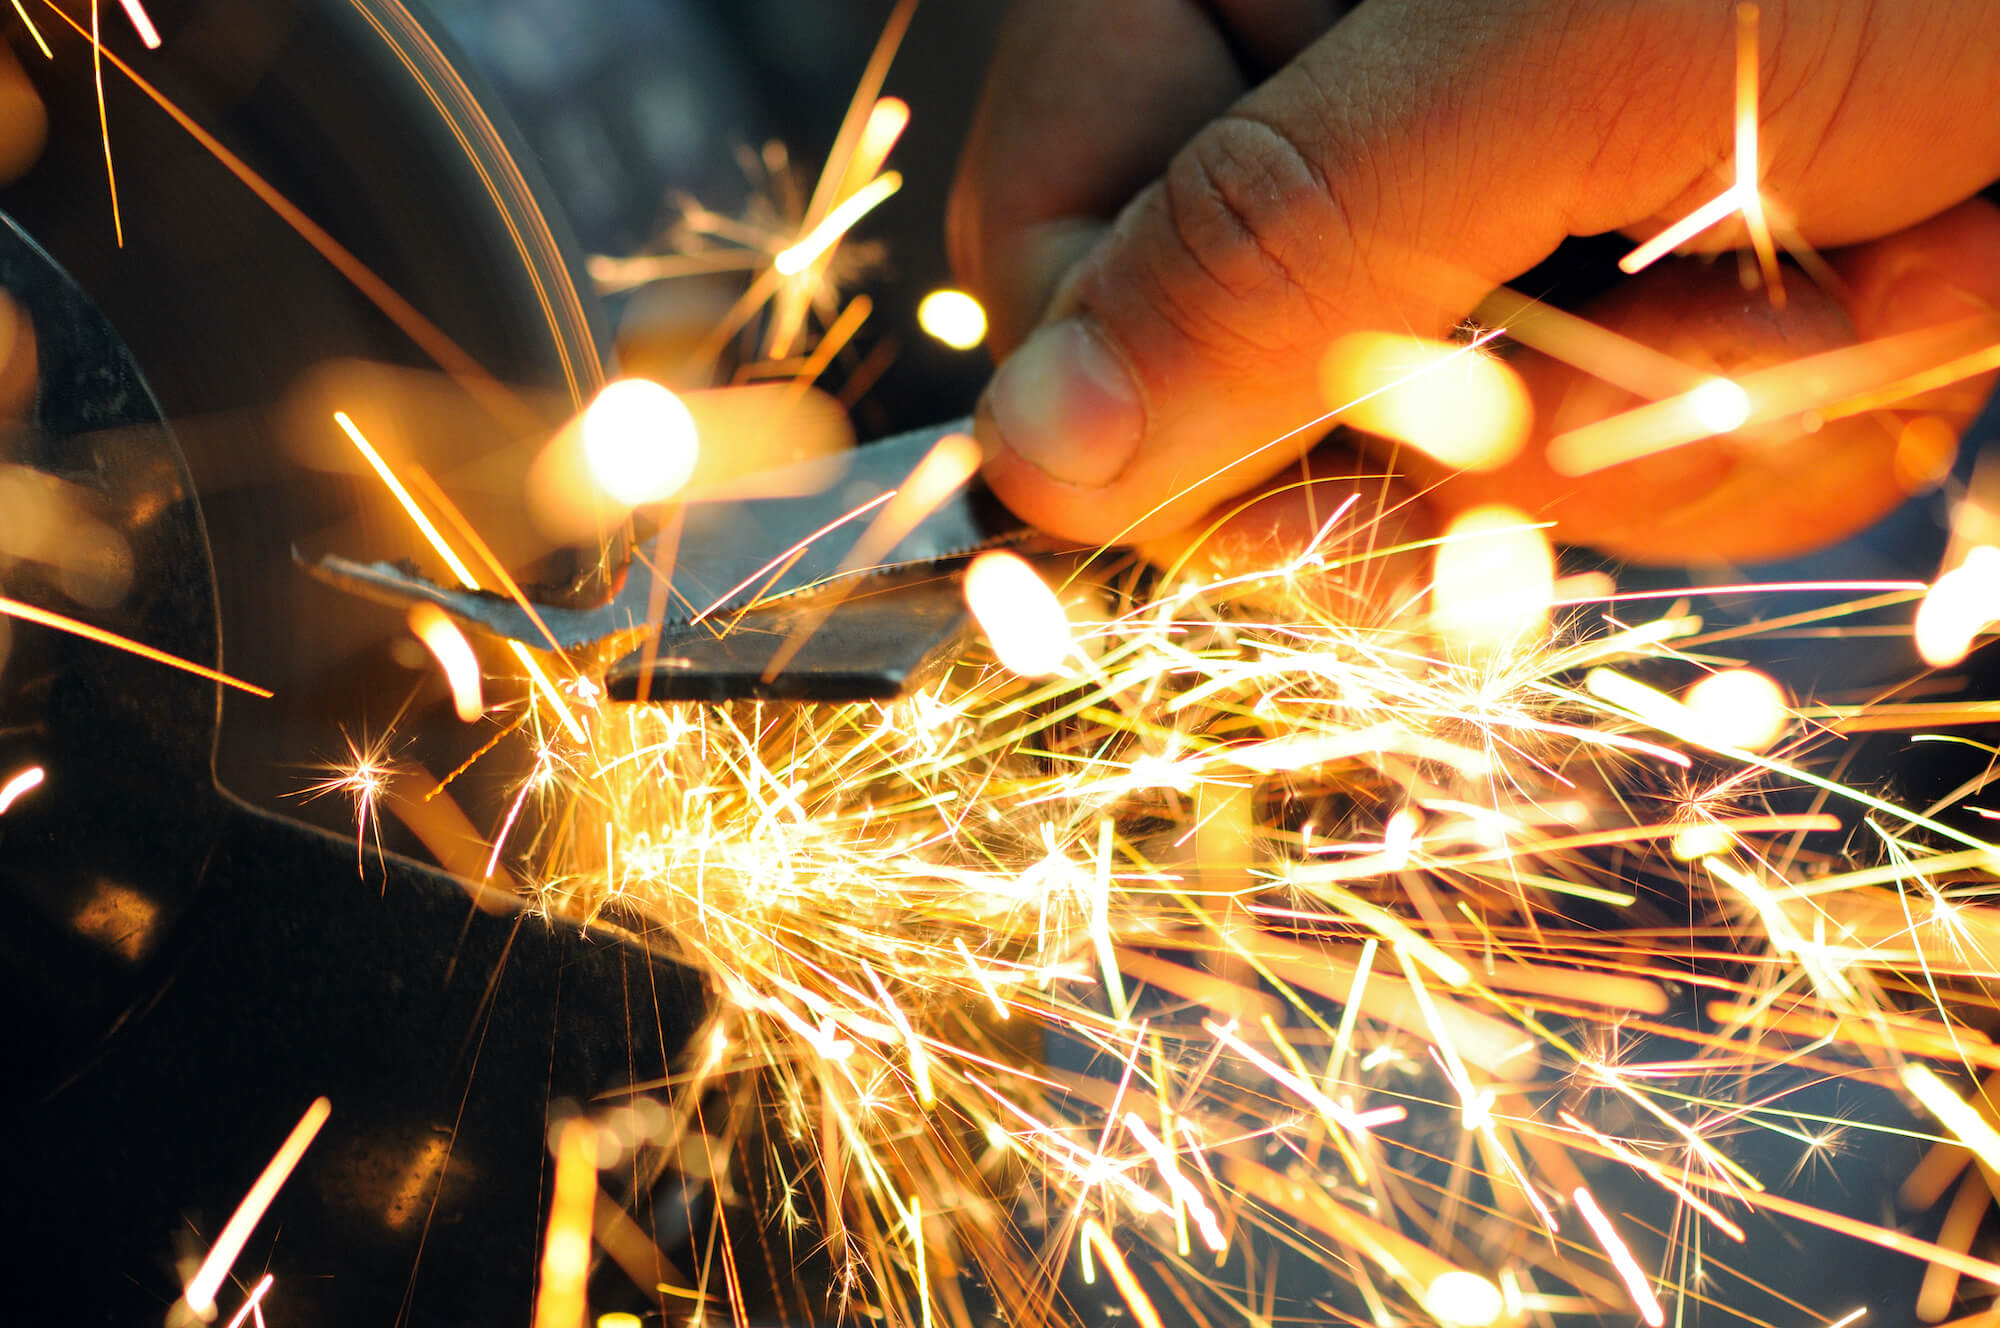 https://koutsilas.gr/wp-content/uploads/2021/02/man-holds-detail-hand-works-with-equipment-cutting-metal-bright-fiery-sparks-fly-apart-closeup-photo.jpg